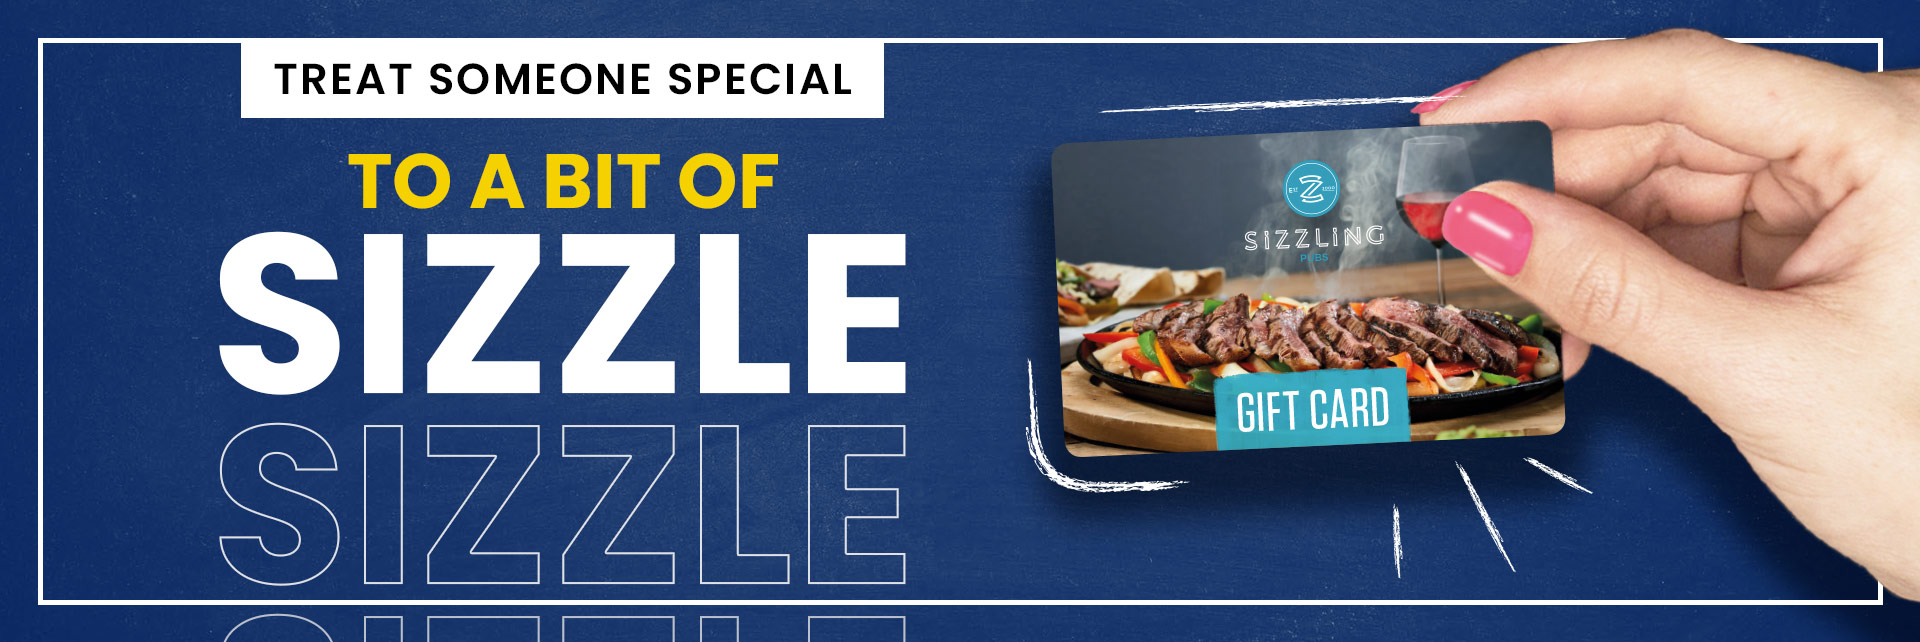 Sizzling Pubs Gift Card at The Deer’s Leap, Kingstanding in Birmingham